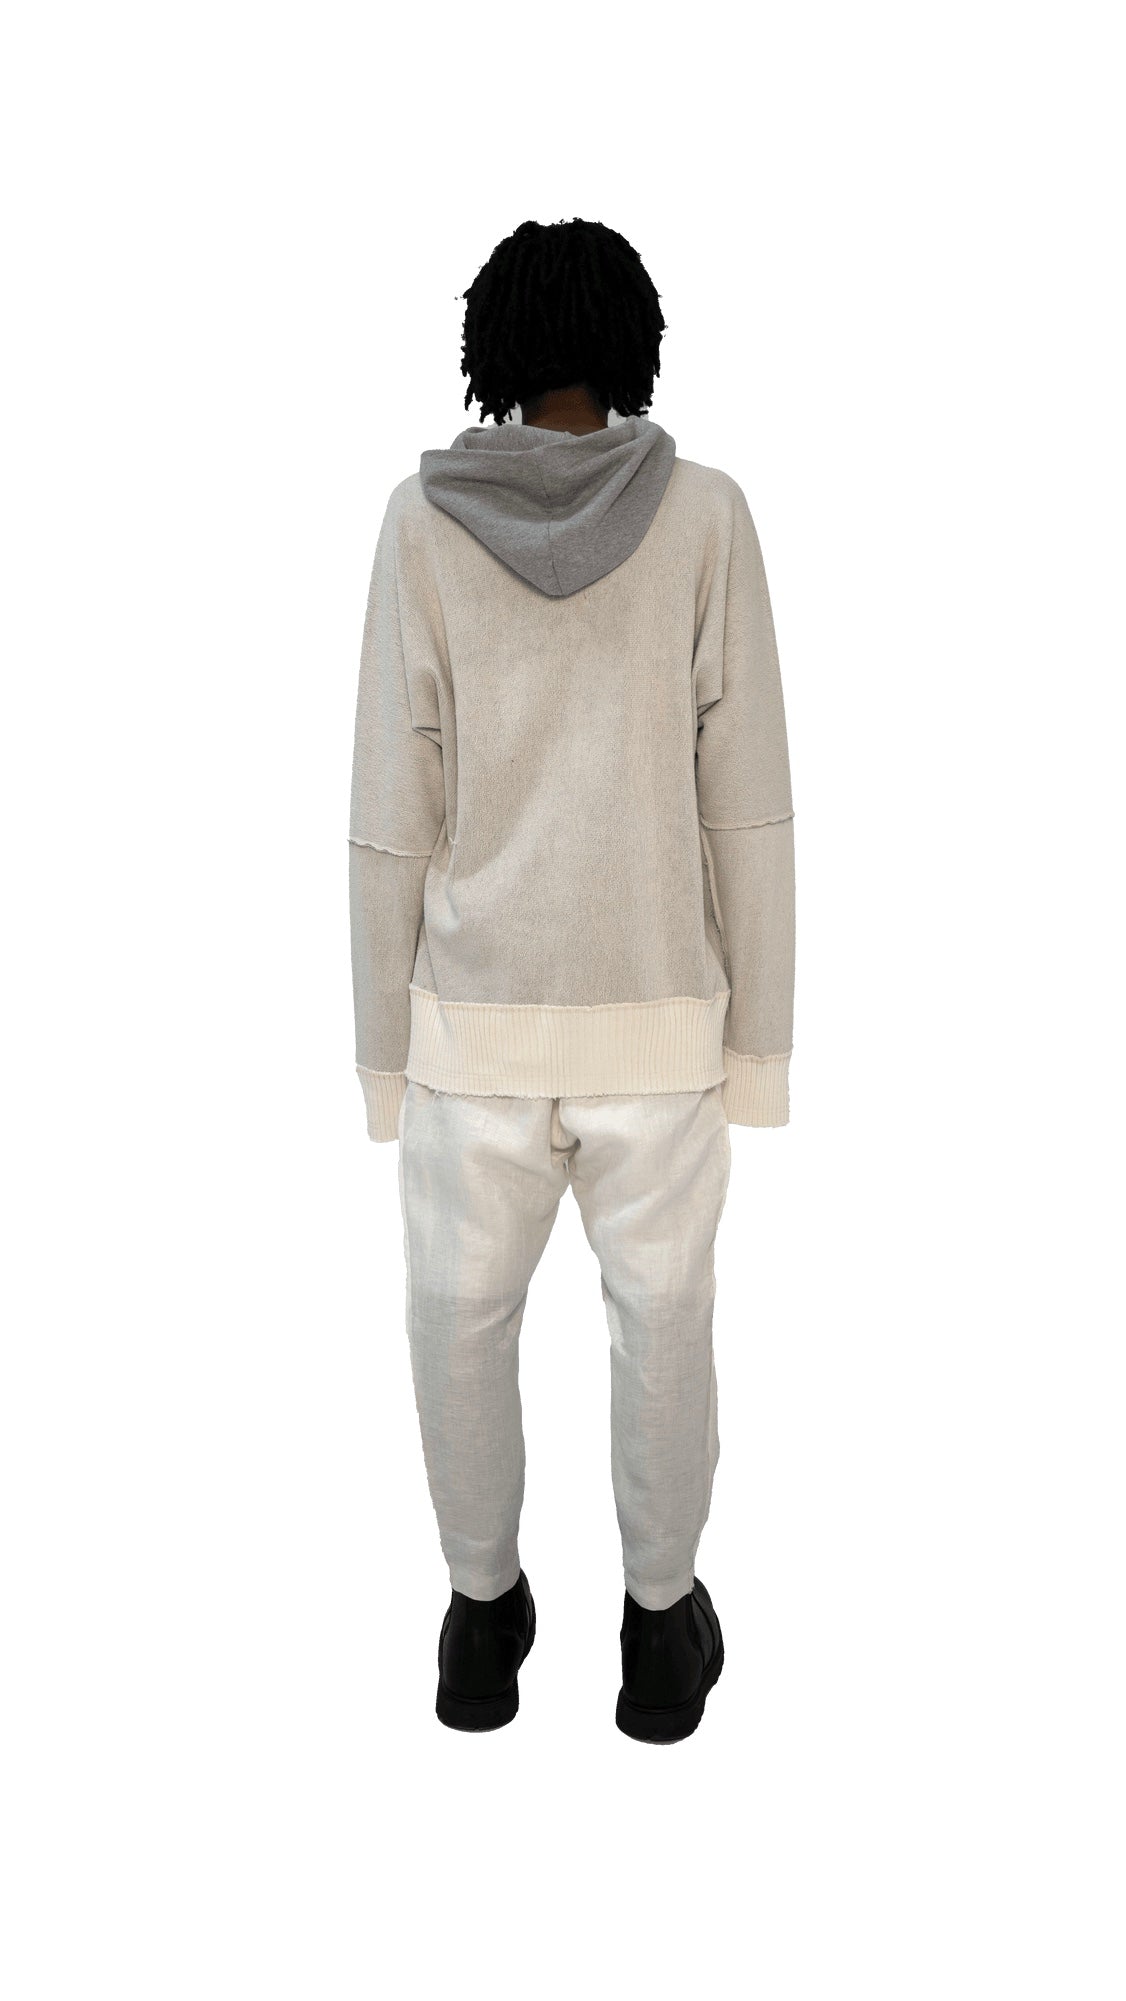 Reversible Kimono Back Hoodie in Grey/ White Loop Back Cotton Jersey with Off White Ribbing